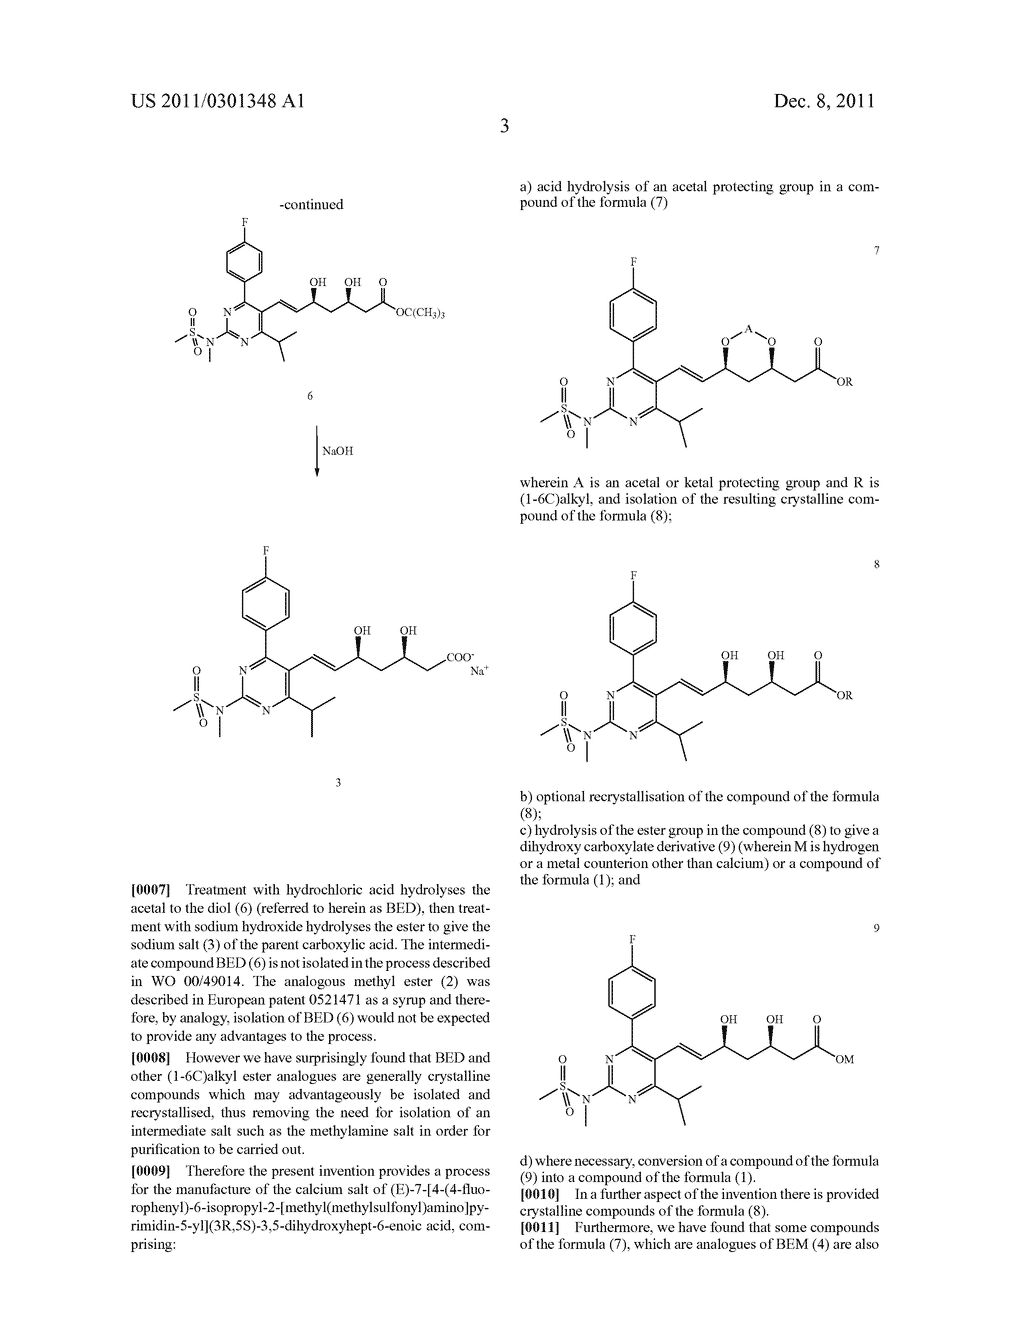 Process for the Manufacture of the Calcium Salt of Rosuvastatin     (E)-7-[4-(4-Fluorophenyl)-6-Isopropyl-2-[Methyl(Methylsulfonyl)Amino]-Pyr-    imidin-5-yl](3R,5S)-3,5-Dihydroxyhept-6-Enoic Acid and Crystalline     Intermediates Thereof - diagram, schematic, and image 12